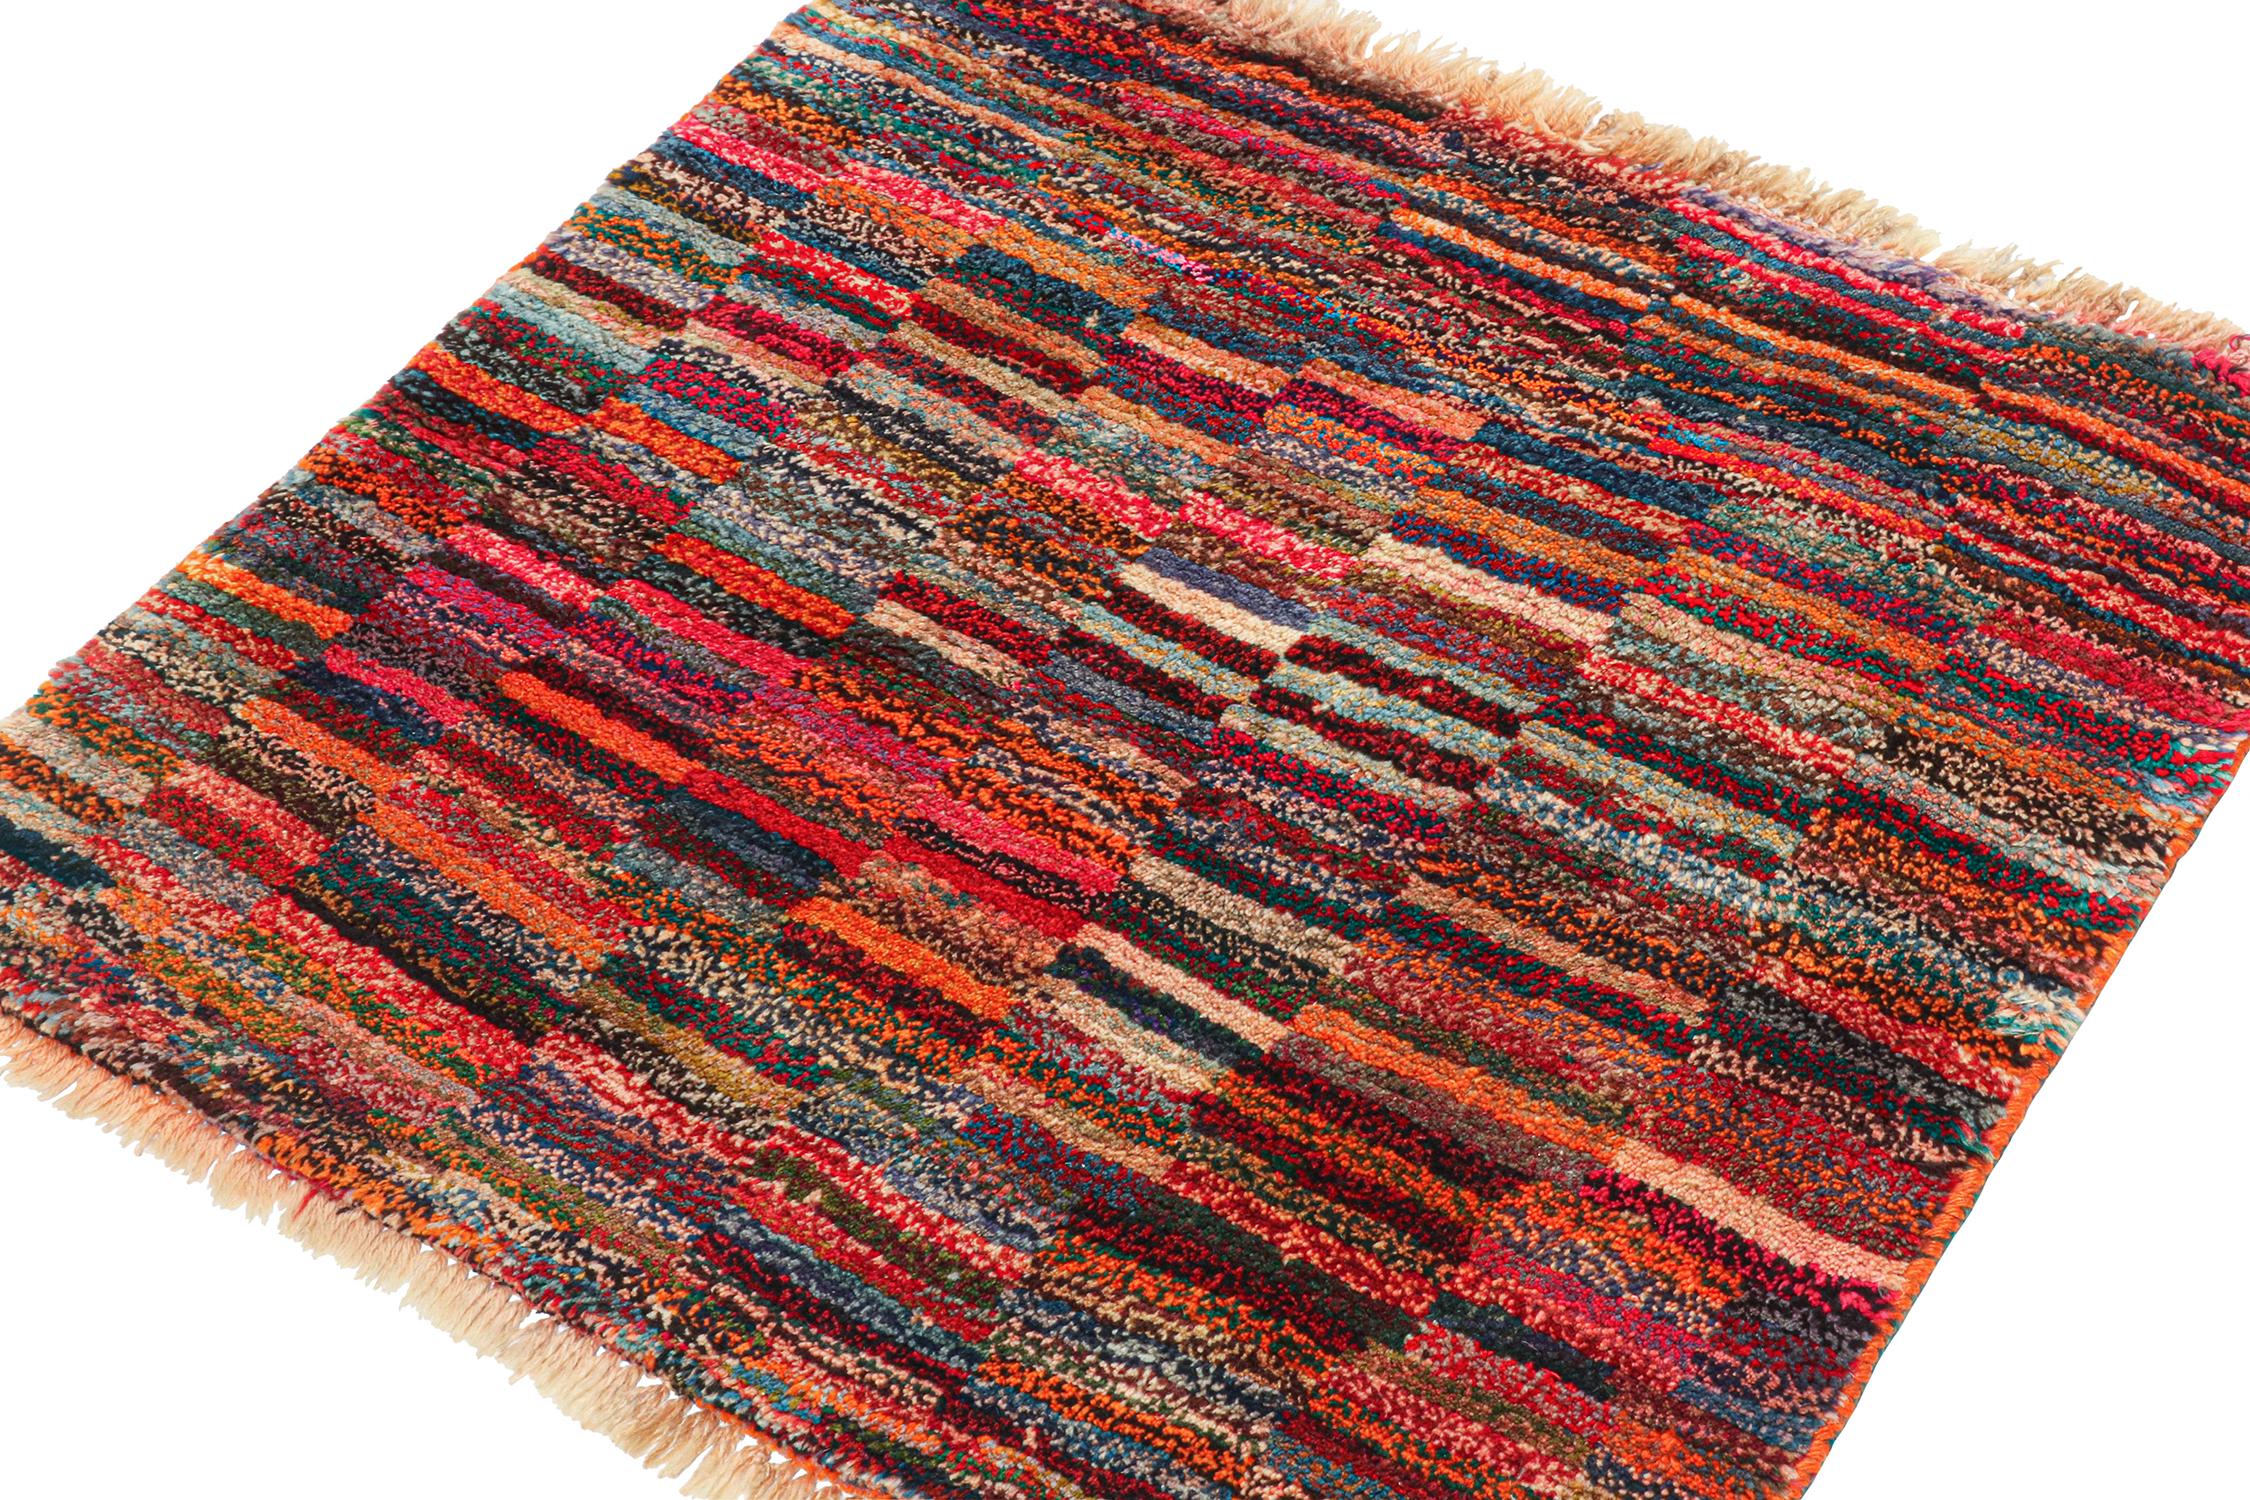 A vintage 2x2 Persian Gabbeh rug, from the latest grand entry in Rug & Kilim’s curation of rare tribal pieces. Hand-knotted in wool, originating circa 1950-1960.
On the Design:
This piece features a gorgeous play of polychromatic tones to